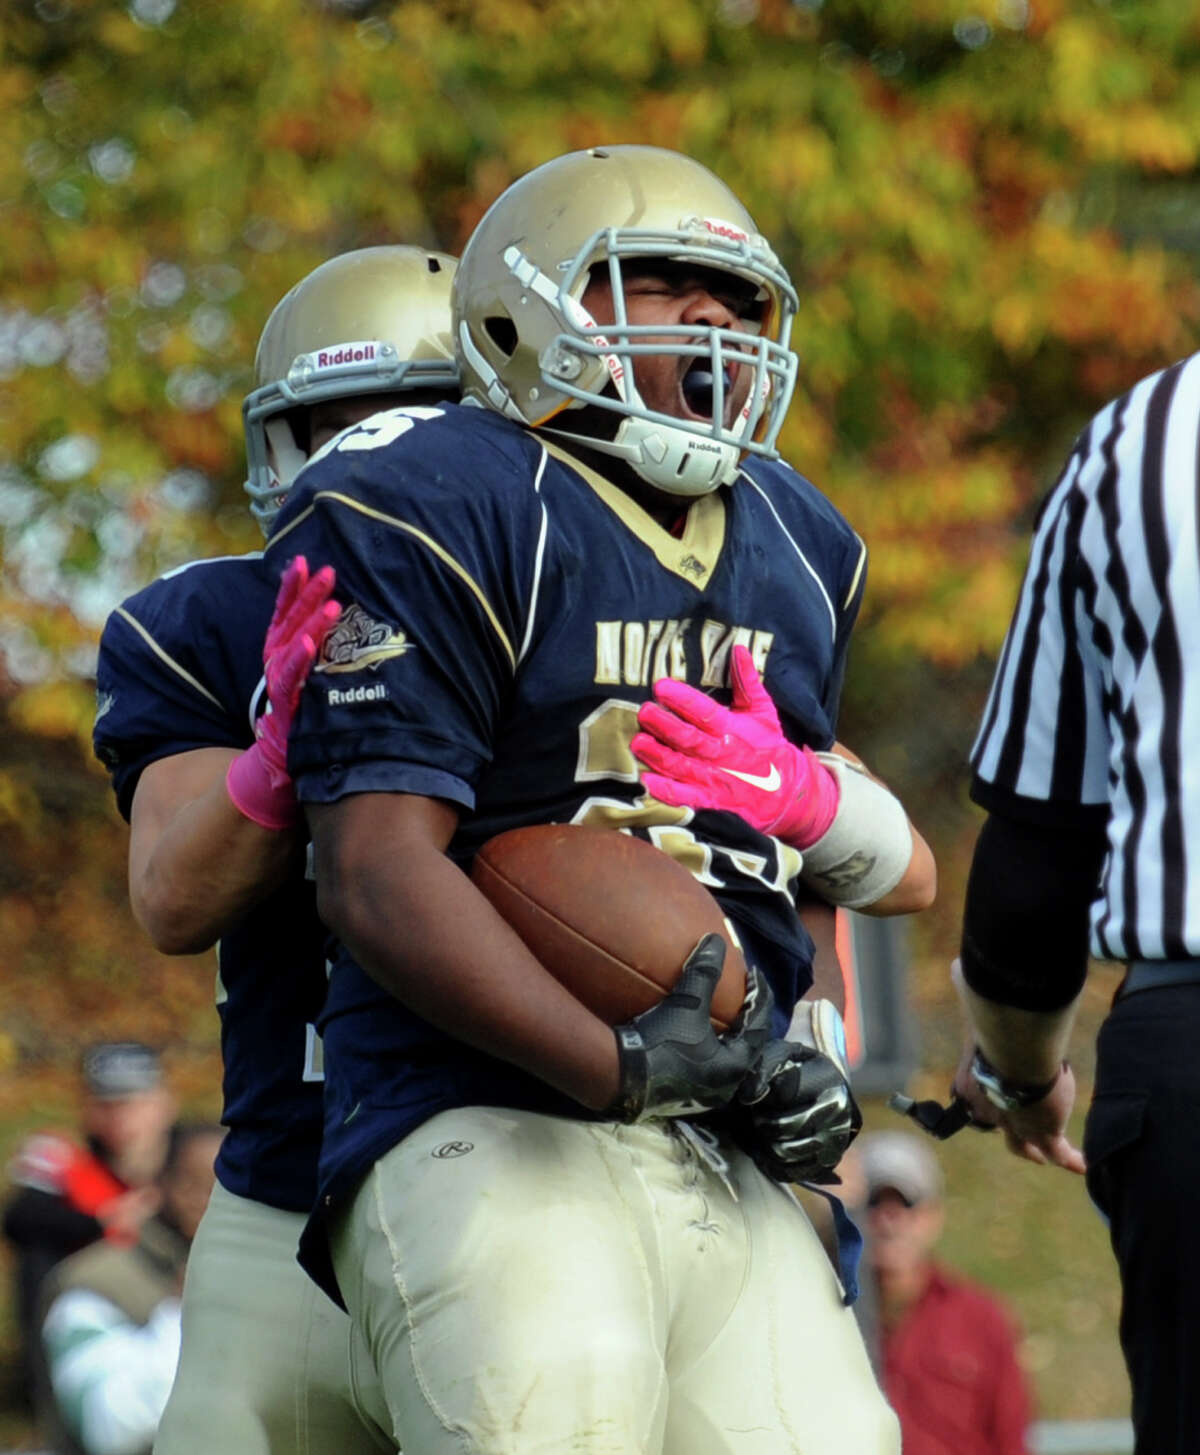 Notre Dame of Fairfield's Hakim Fleming yells out to celebrate a touchdown during high school football action against Joel Barlow in Fairfield, Conn. on Saturday October 31, 2015.